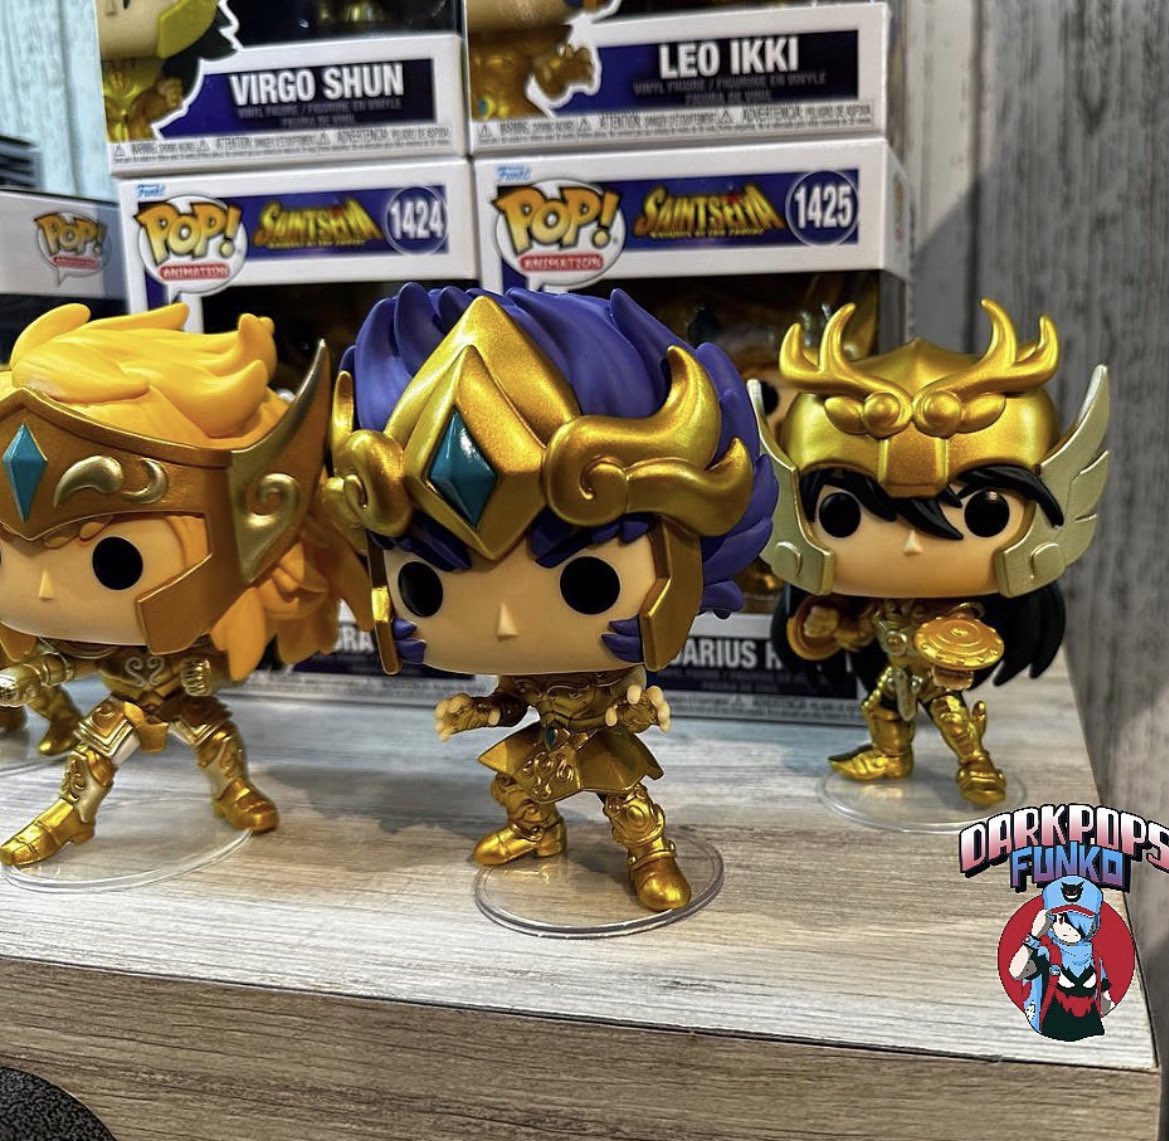 Funko POP News ! on X: Saint Seiya fans. First look at some awesome new Funko  POPs! Thanks @Darkpops_ ~ #SaintSeiya #FPN #FunkoPOPNews #Funko #POP  #POPVinyl #FunkoPOP #FunkoSoda  / X